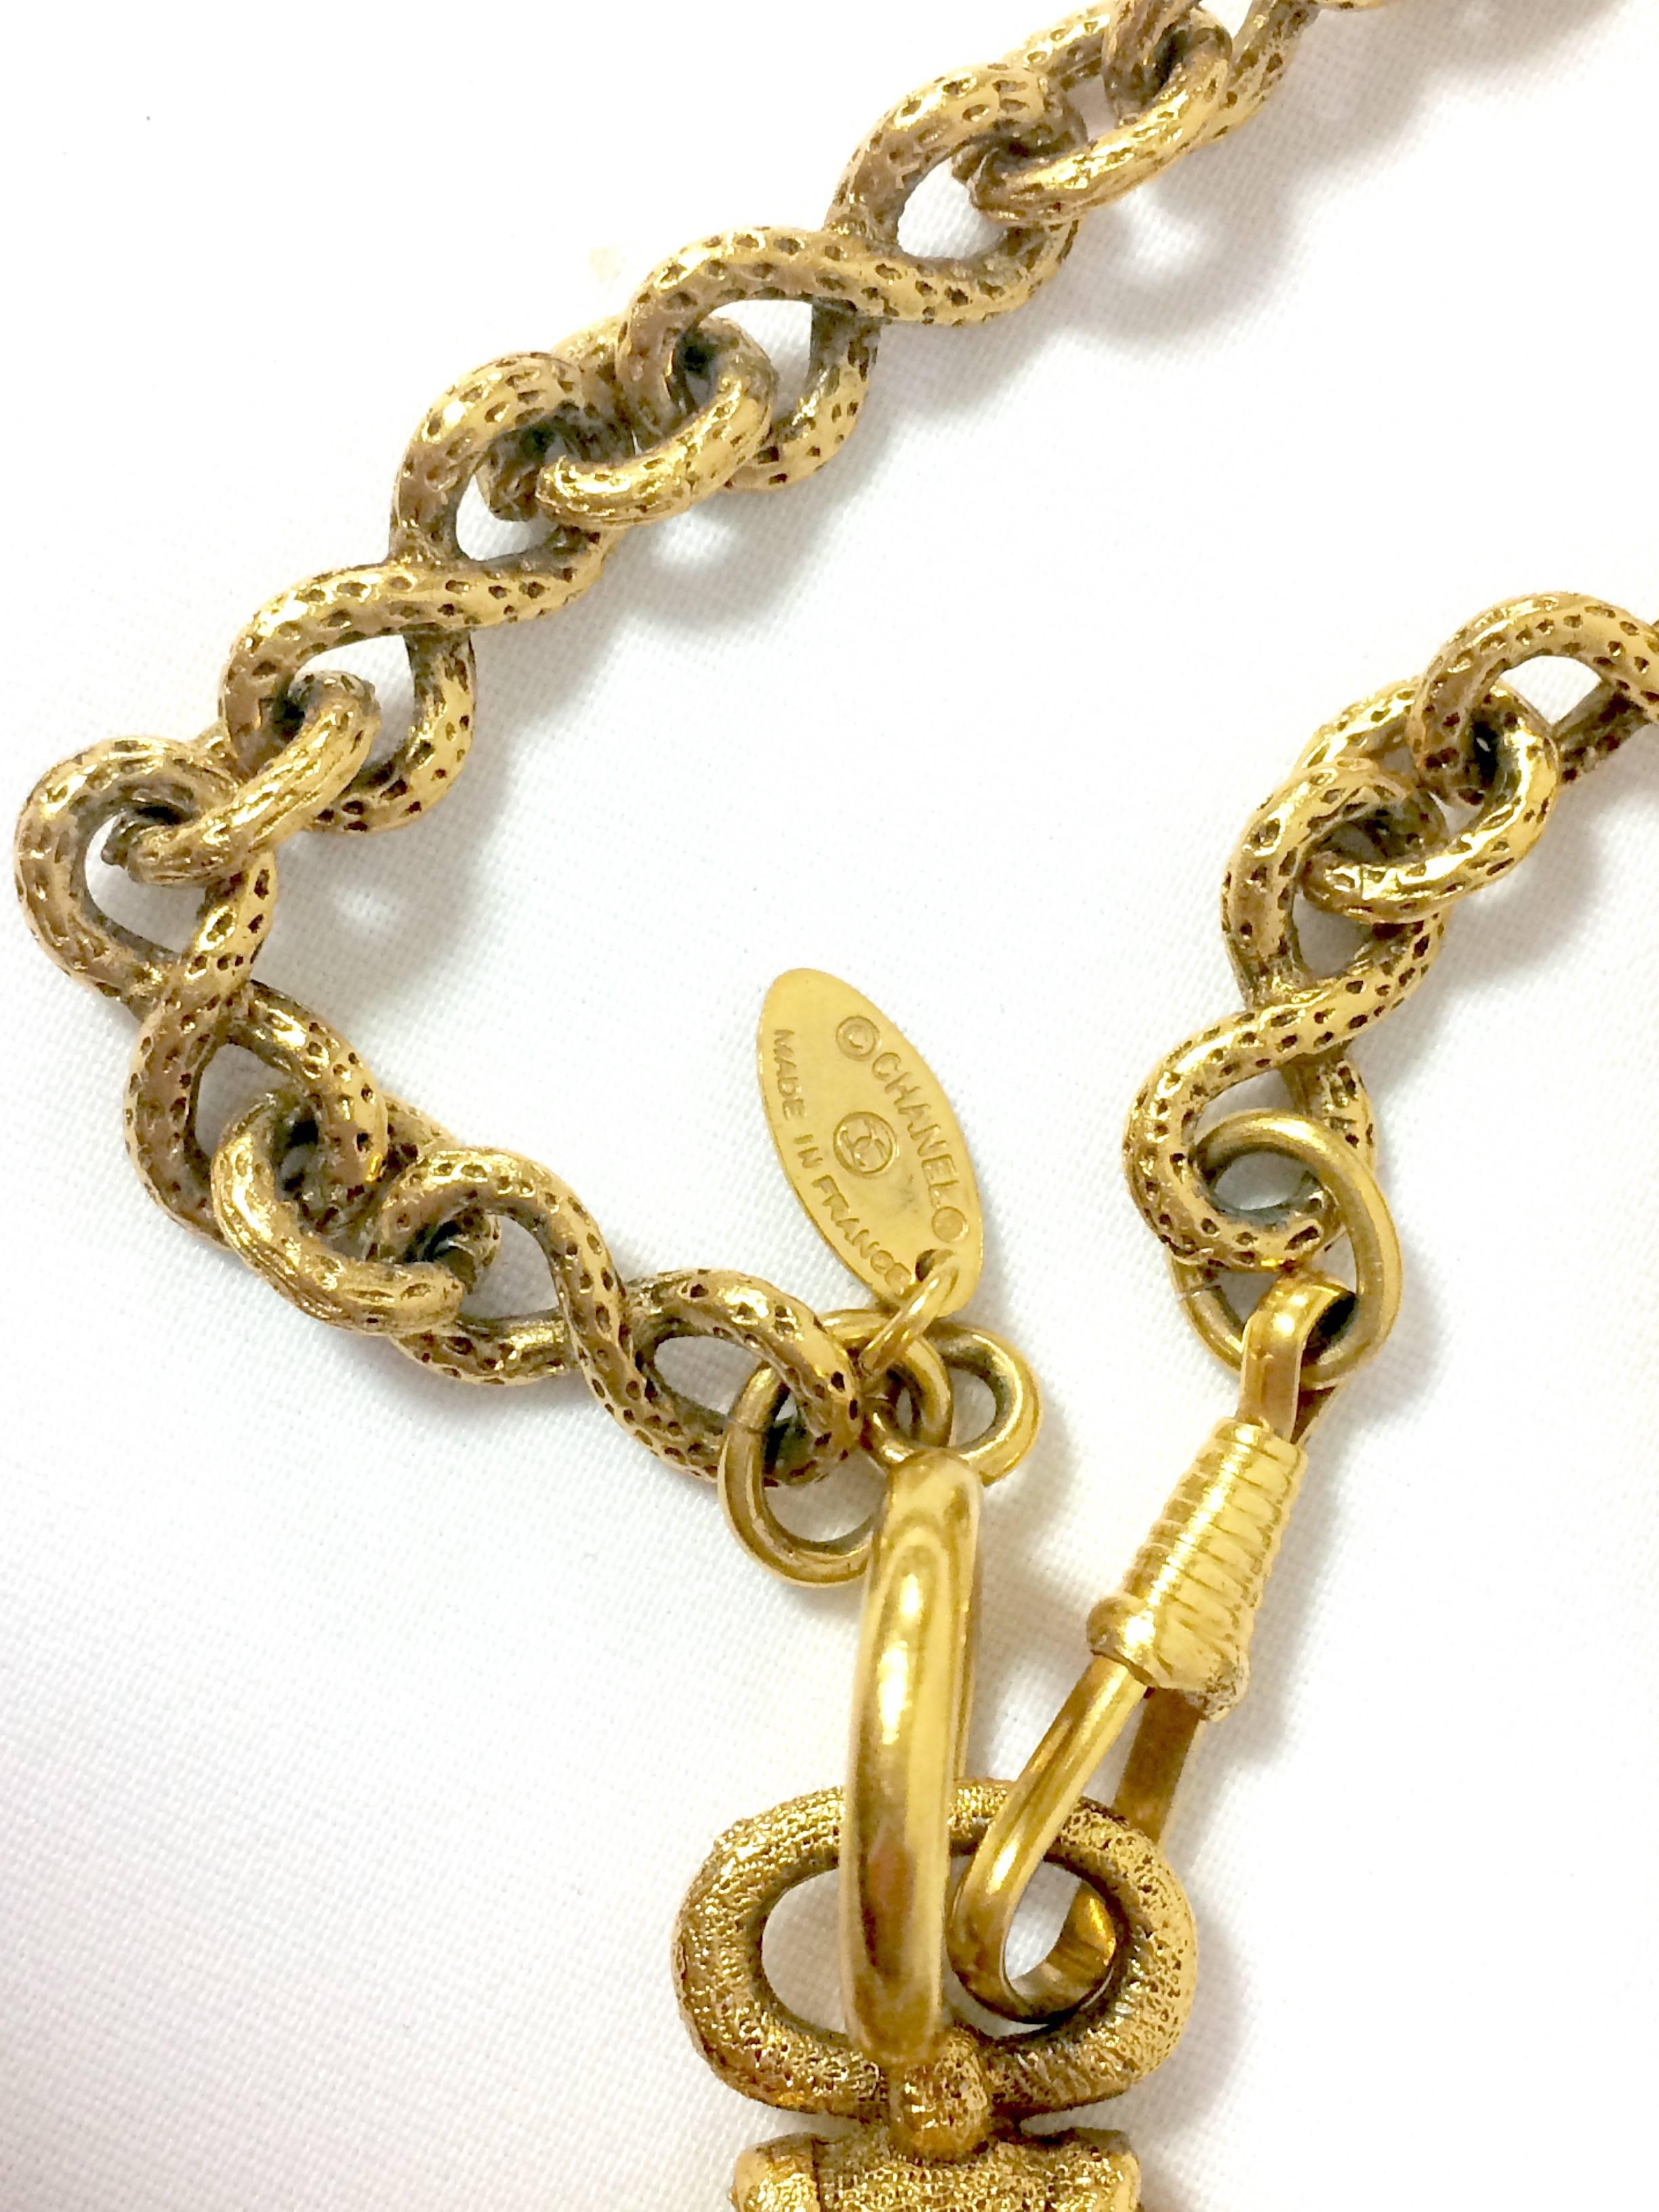 Vintage CHANEL long chain necklace with round glass loupe pendant top and CC. 3